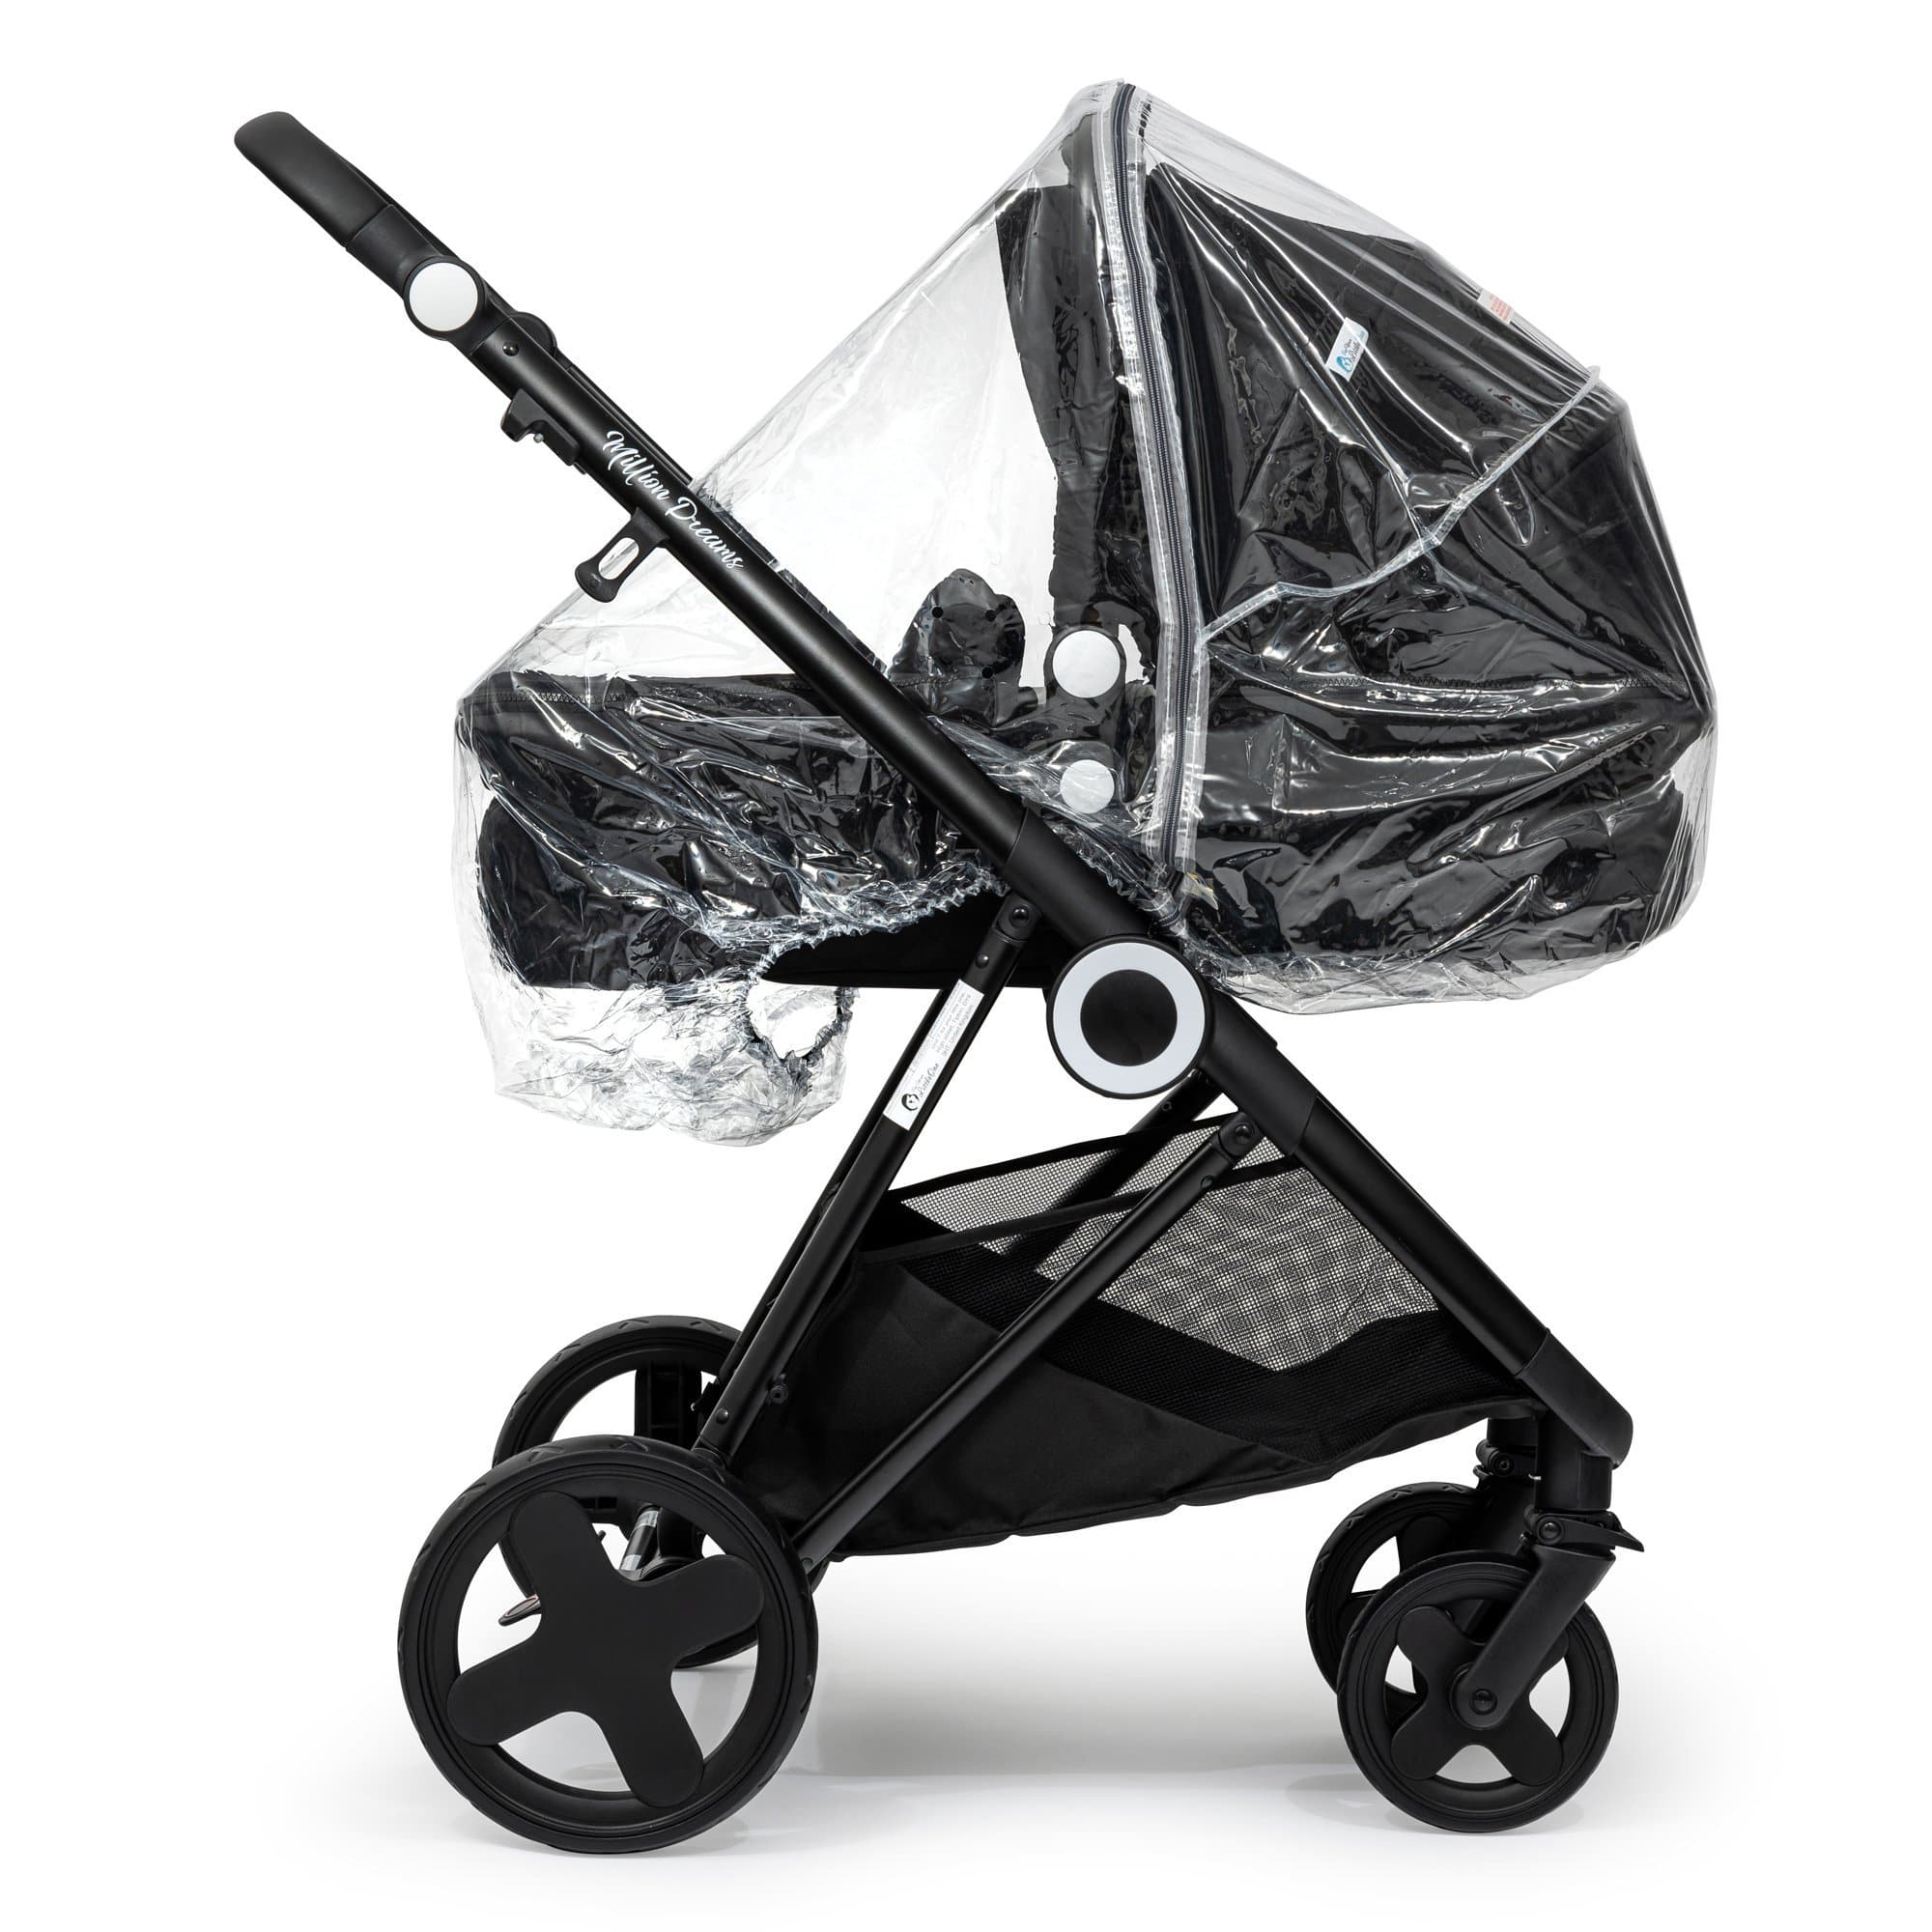 2 in 1 Rain Cover Compatible with Cosatto - Fits All Models - For Your Little One